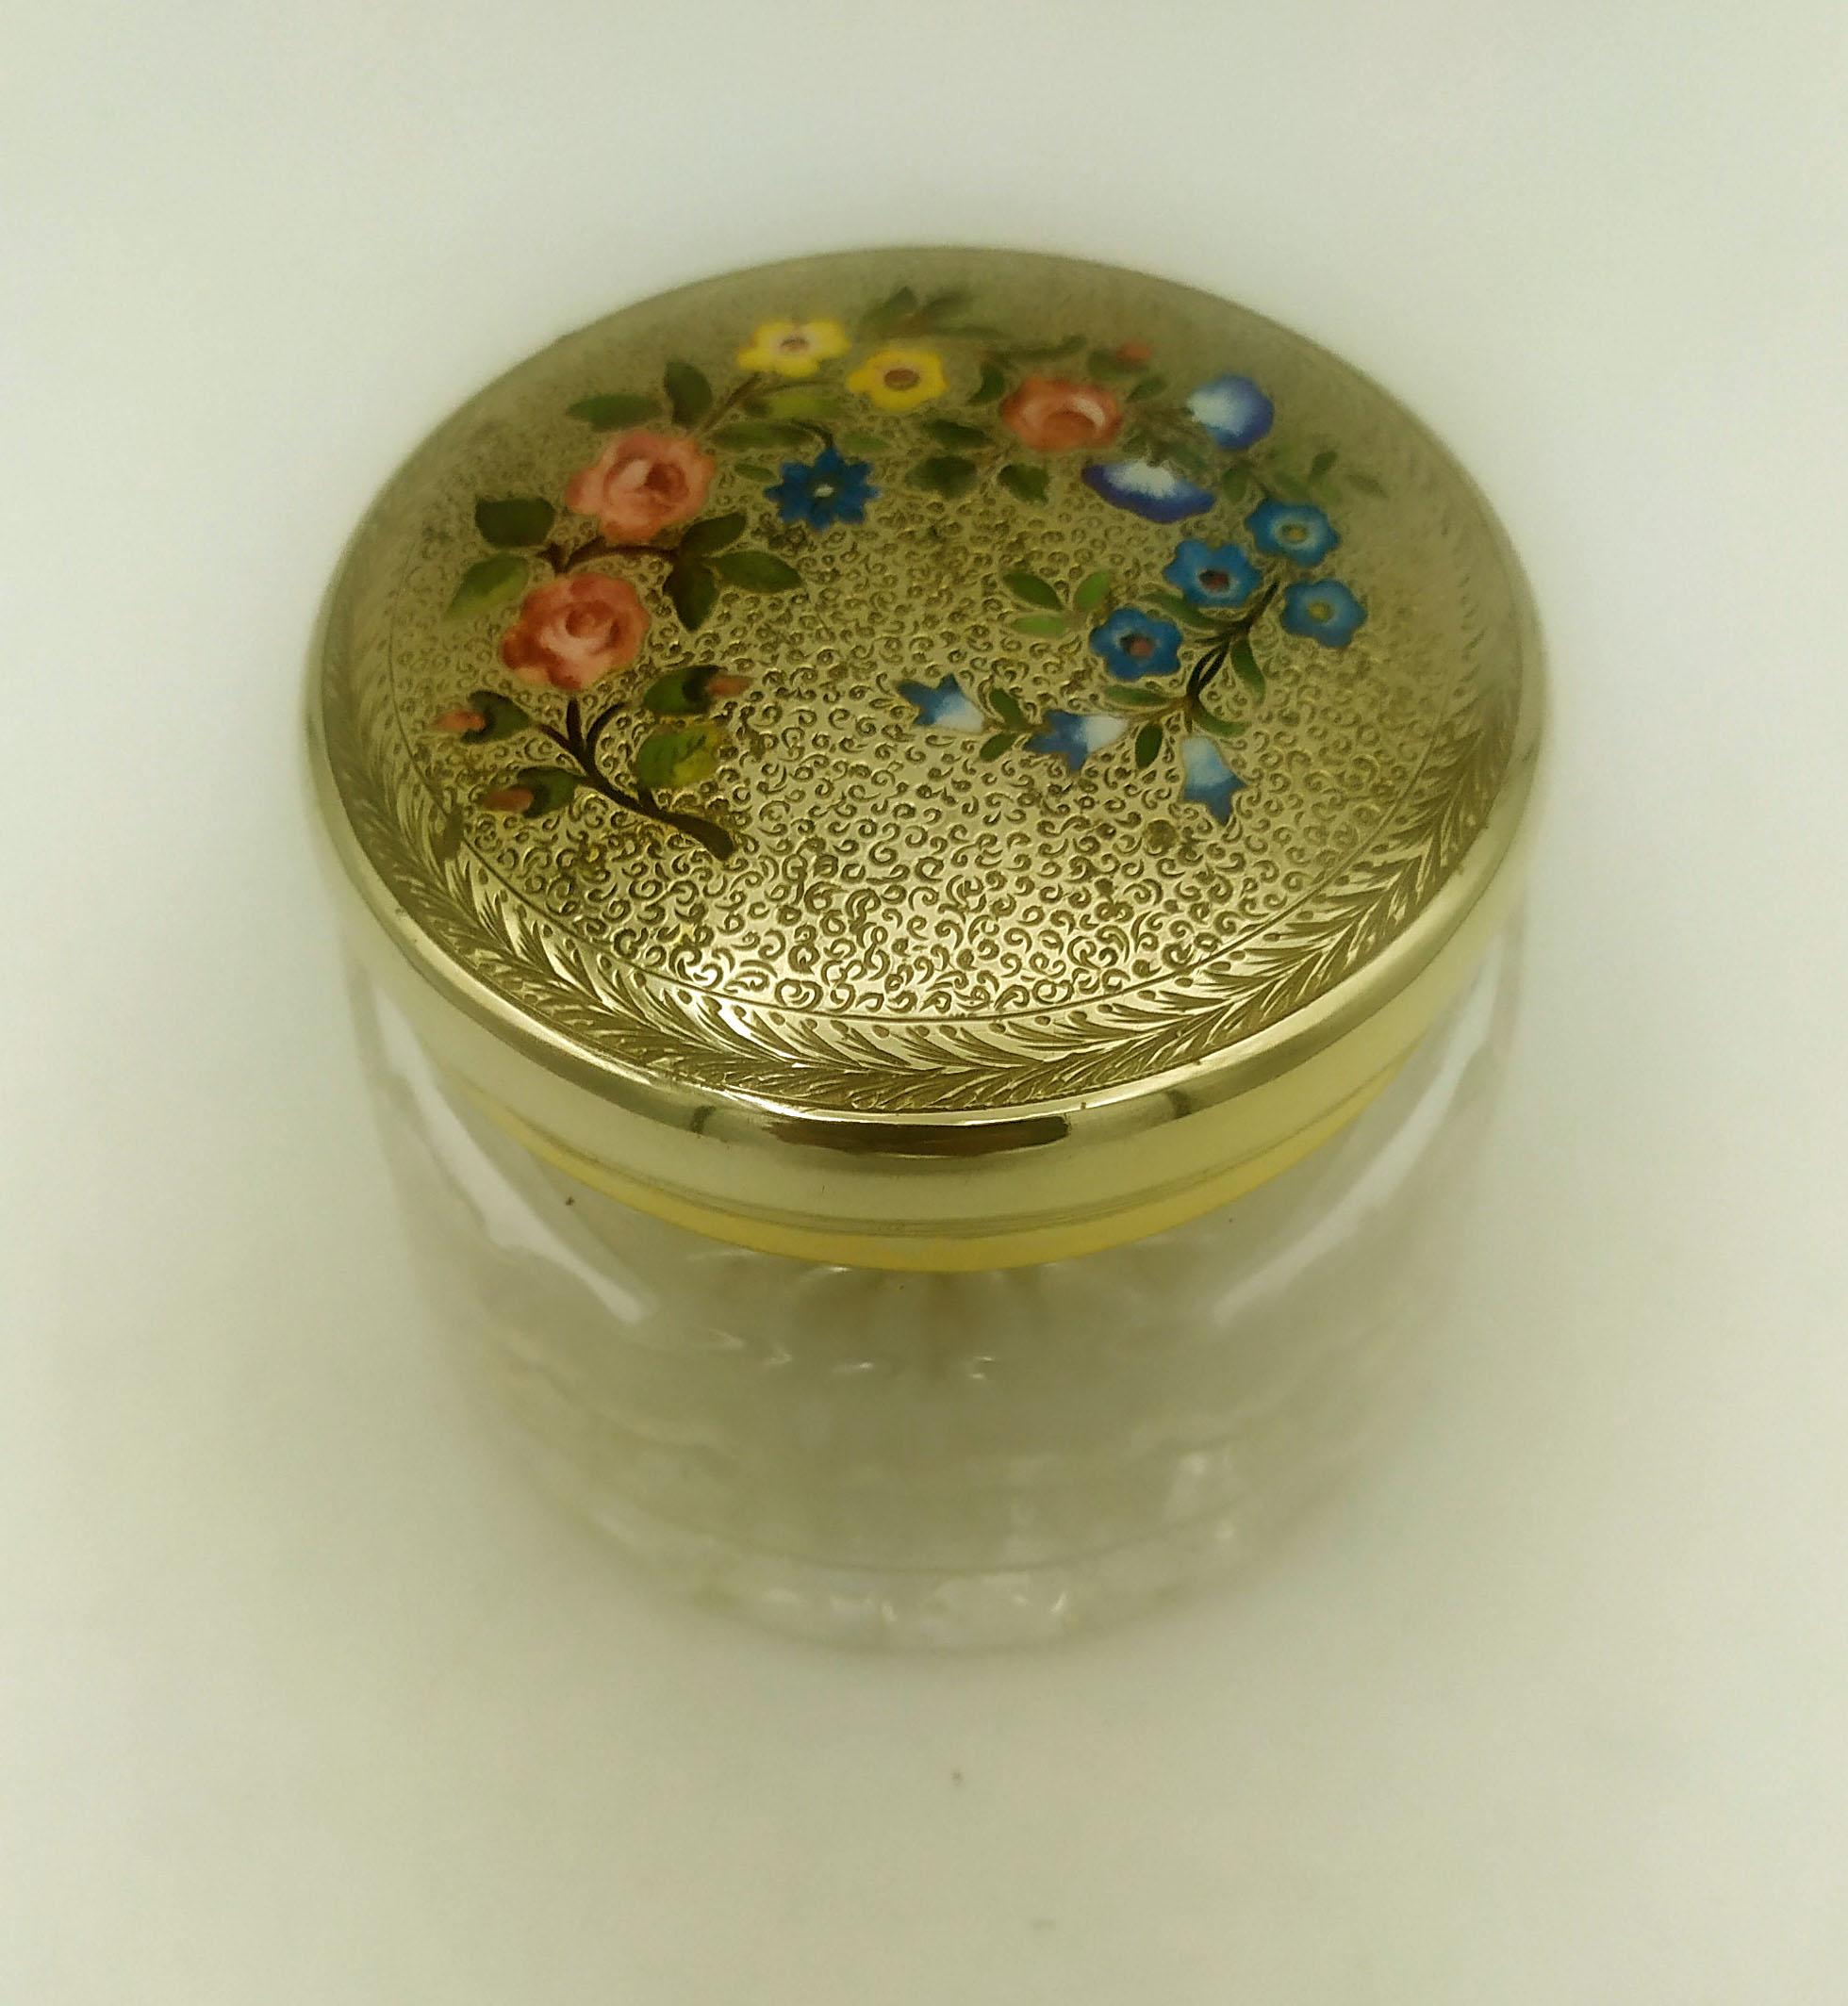 Round wedding favor with lid in 925/1000 sterling silver gold plated with fine manual engraving of flower shoots, fire-enamelled with various colours, in early 1900s Art Nouveau style and fine hand-engraved decoration around it. Vase below in cut